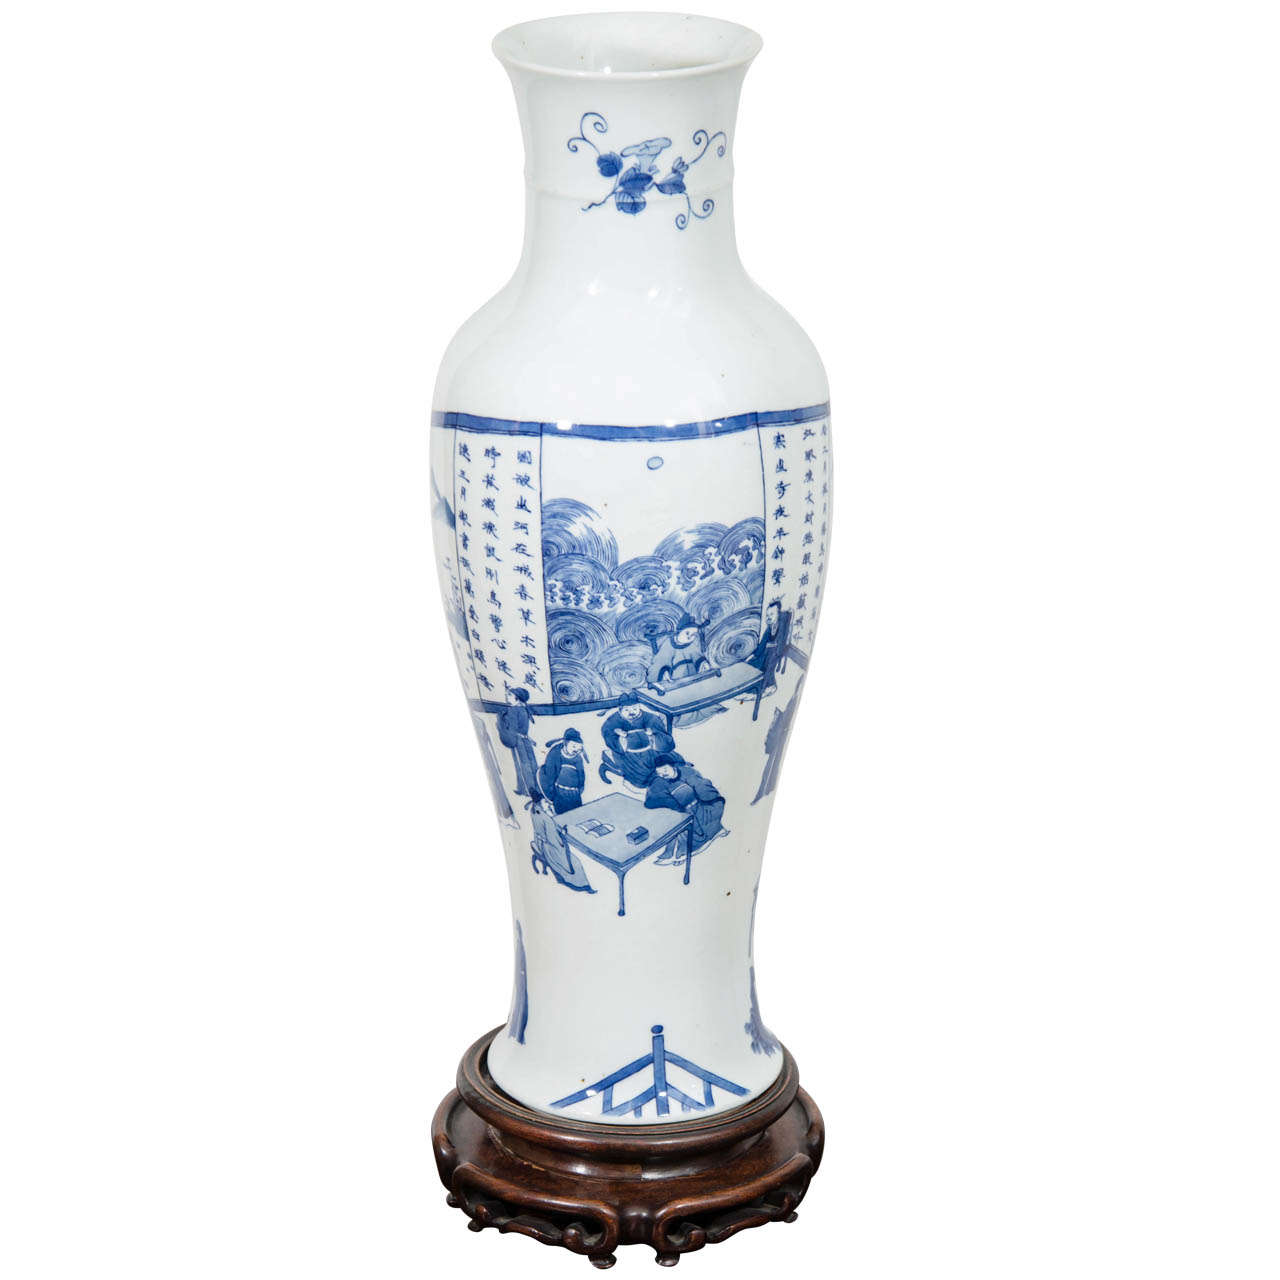 Chinese Guangxu Period Porcelain Vase with "Meeting of 18 Scholars" Motif